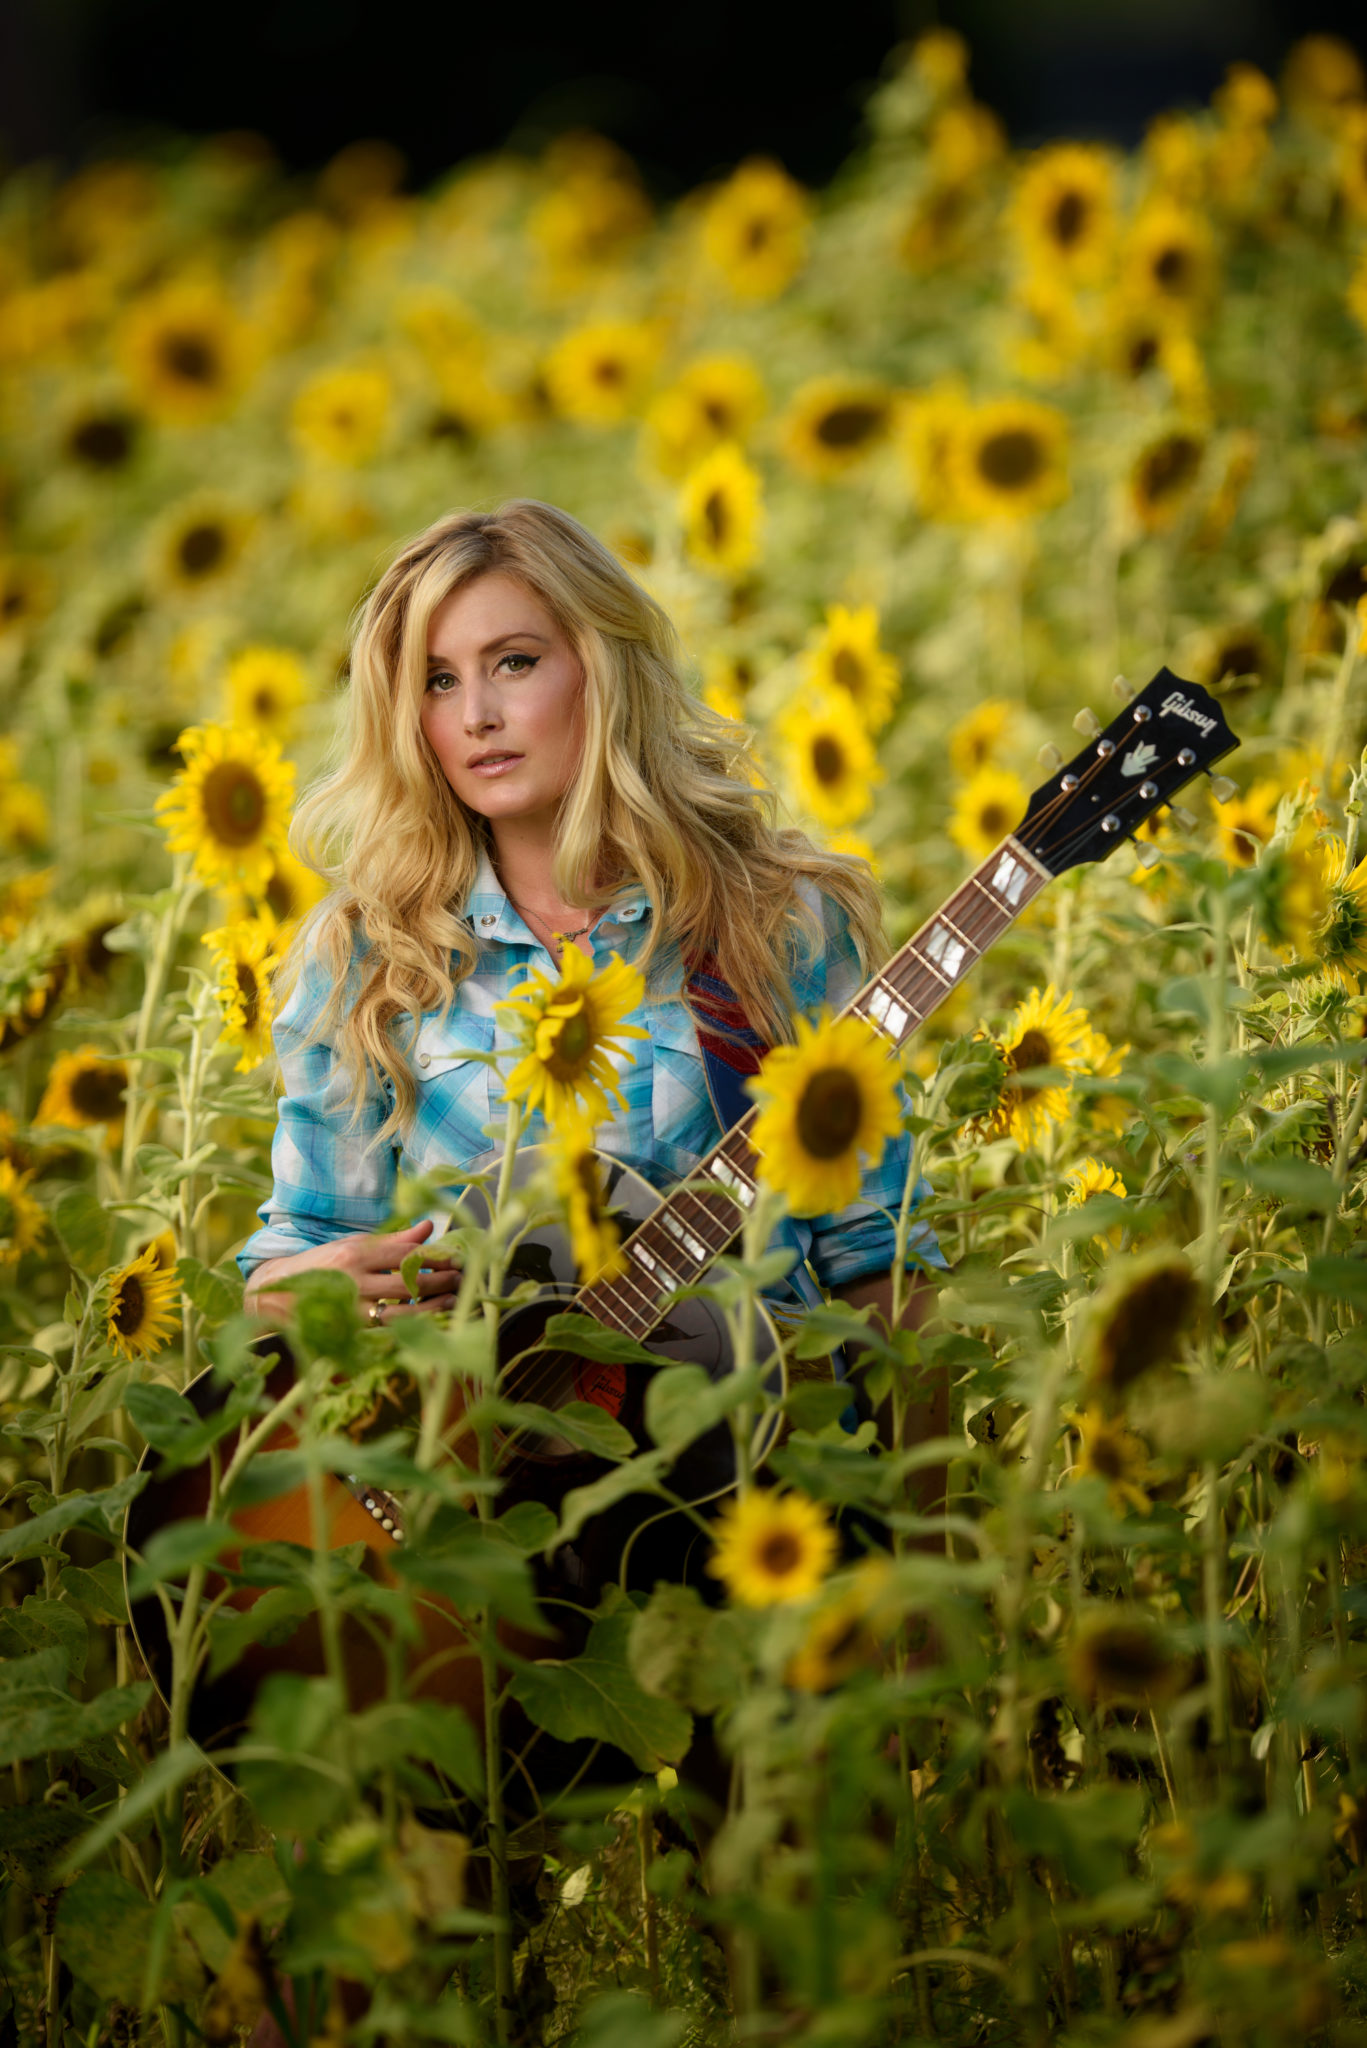 Sunshine, Sunflowers and A Country Rocker!